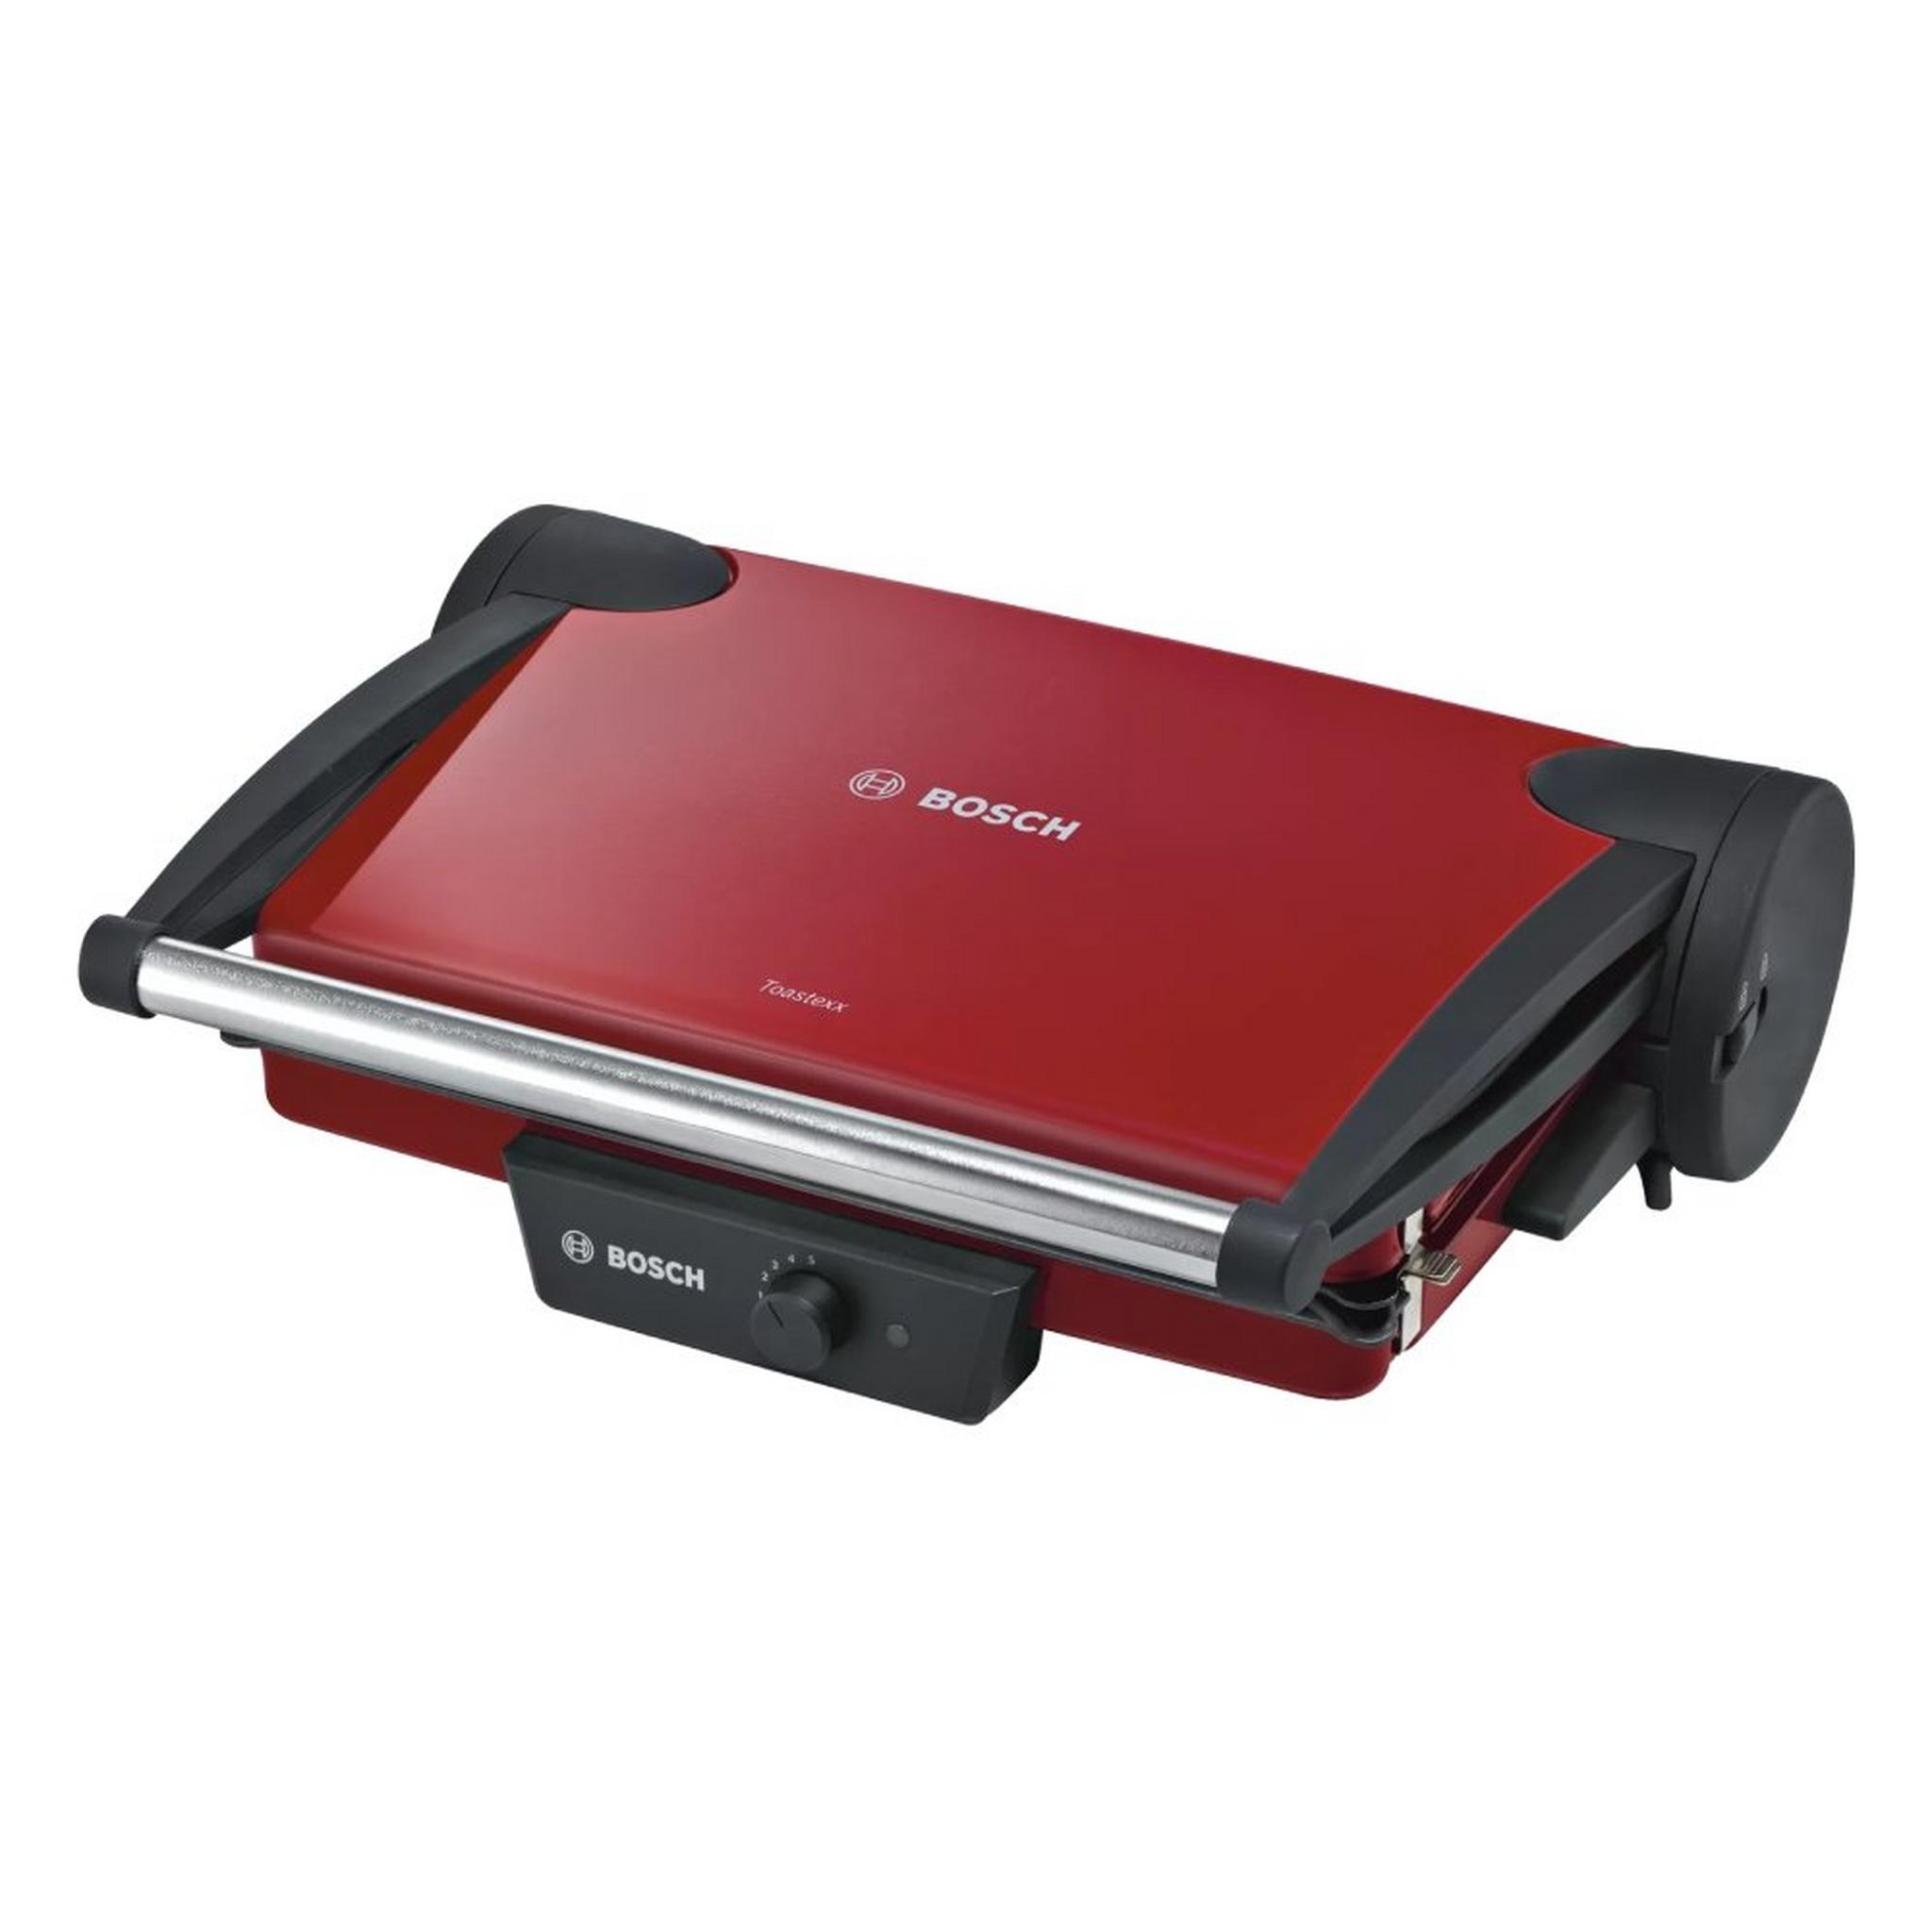 Bosch Electric Contact Grill 1800W - Red TFB4402